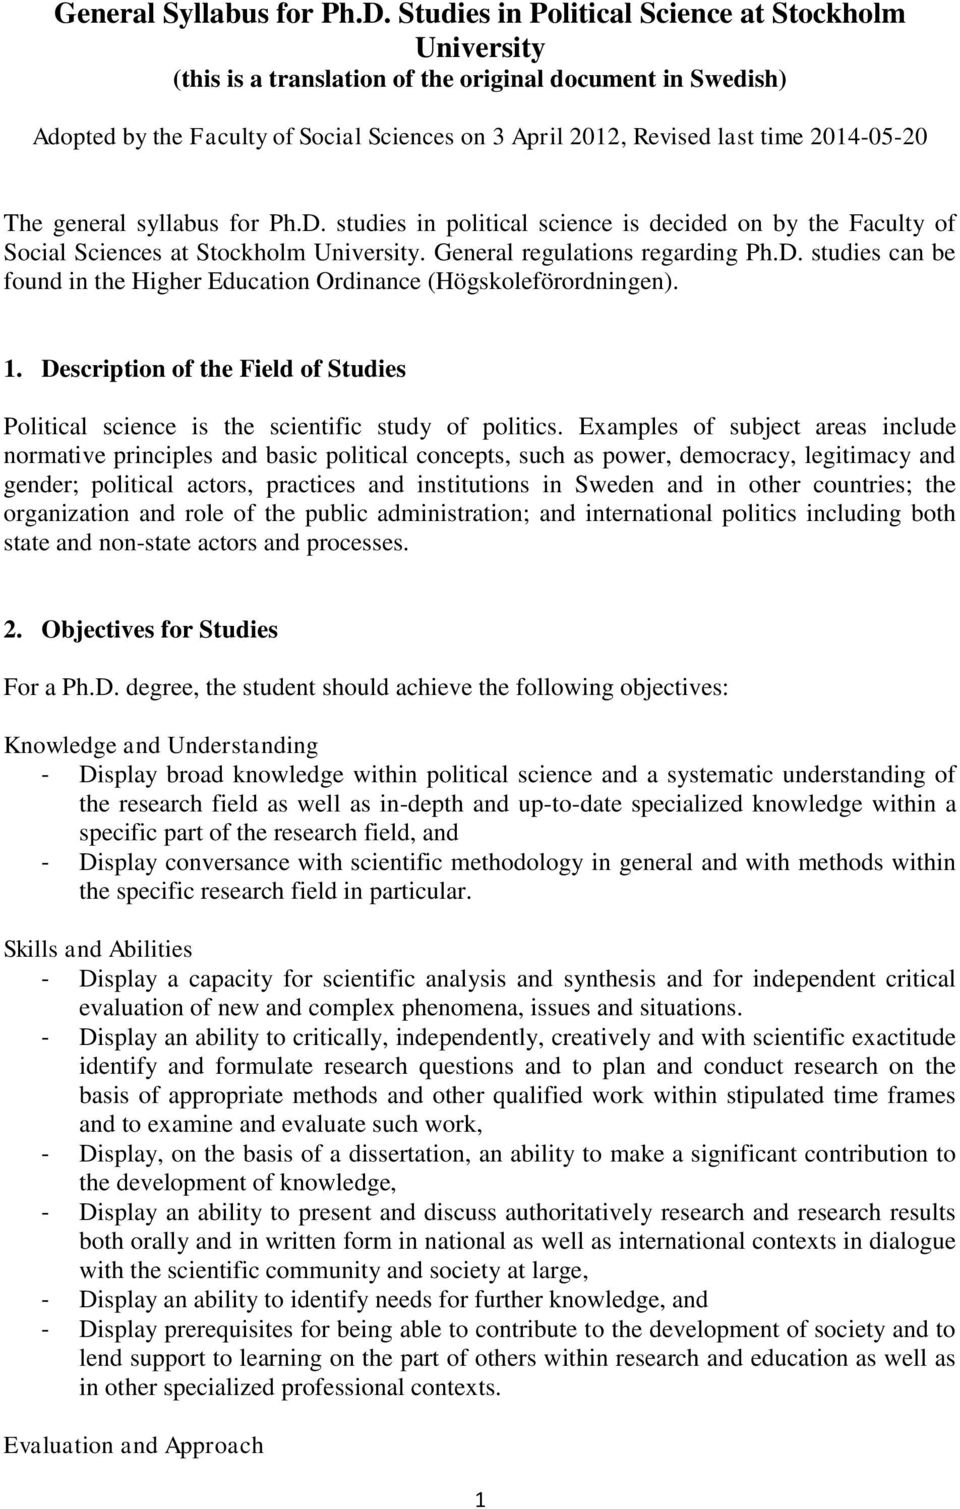 2014-05-20 The general syllabus for Ph.D. studies in political science is decided on by the Faculty of Social Sciences at Stockholm University. General regulations regarding Ph.D. studies can be found in the Higher Education Ordinance (Högskoleförordningen).